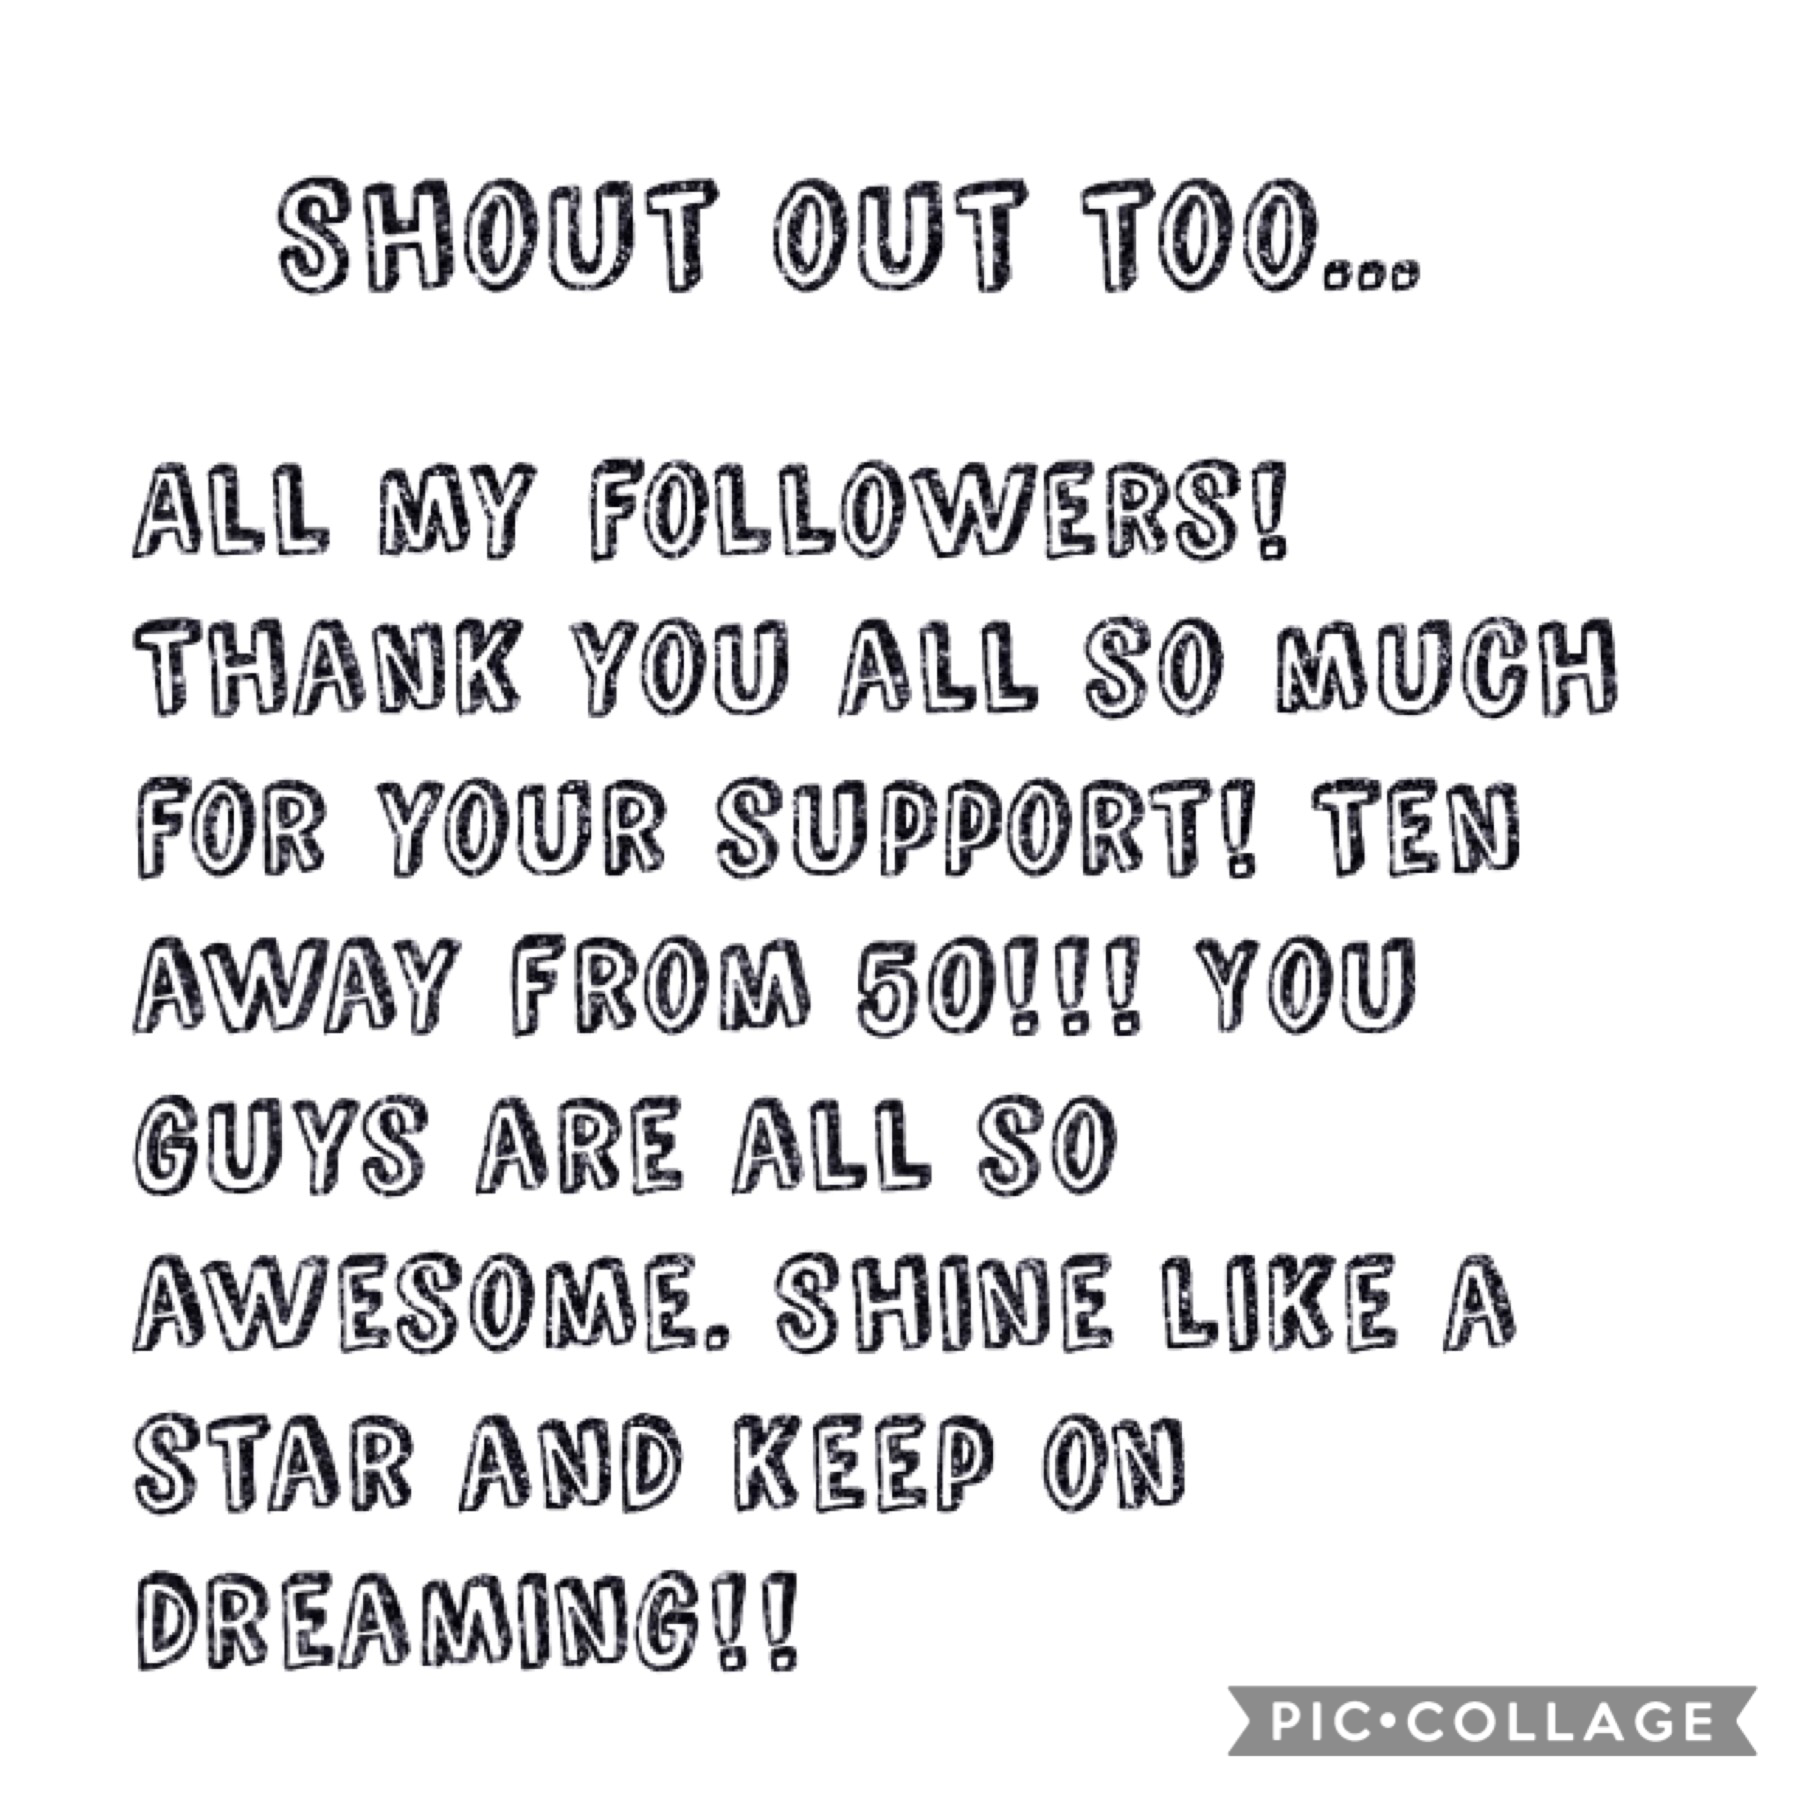 You guys are amazing!!